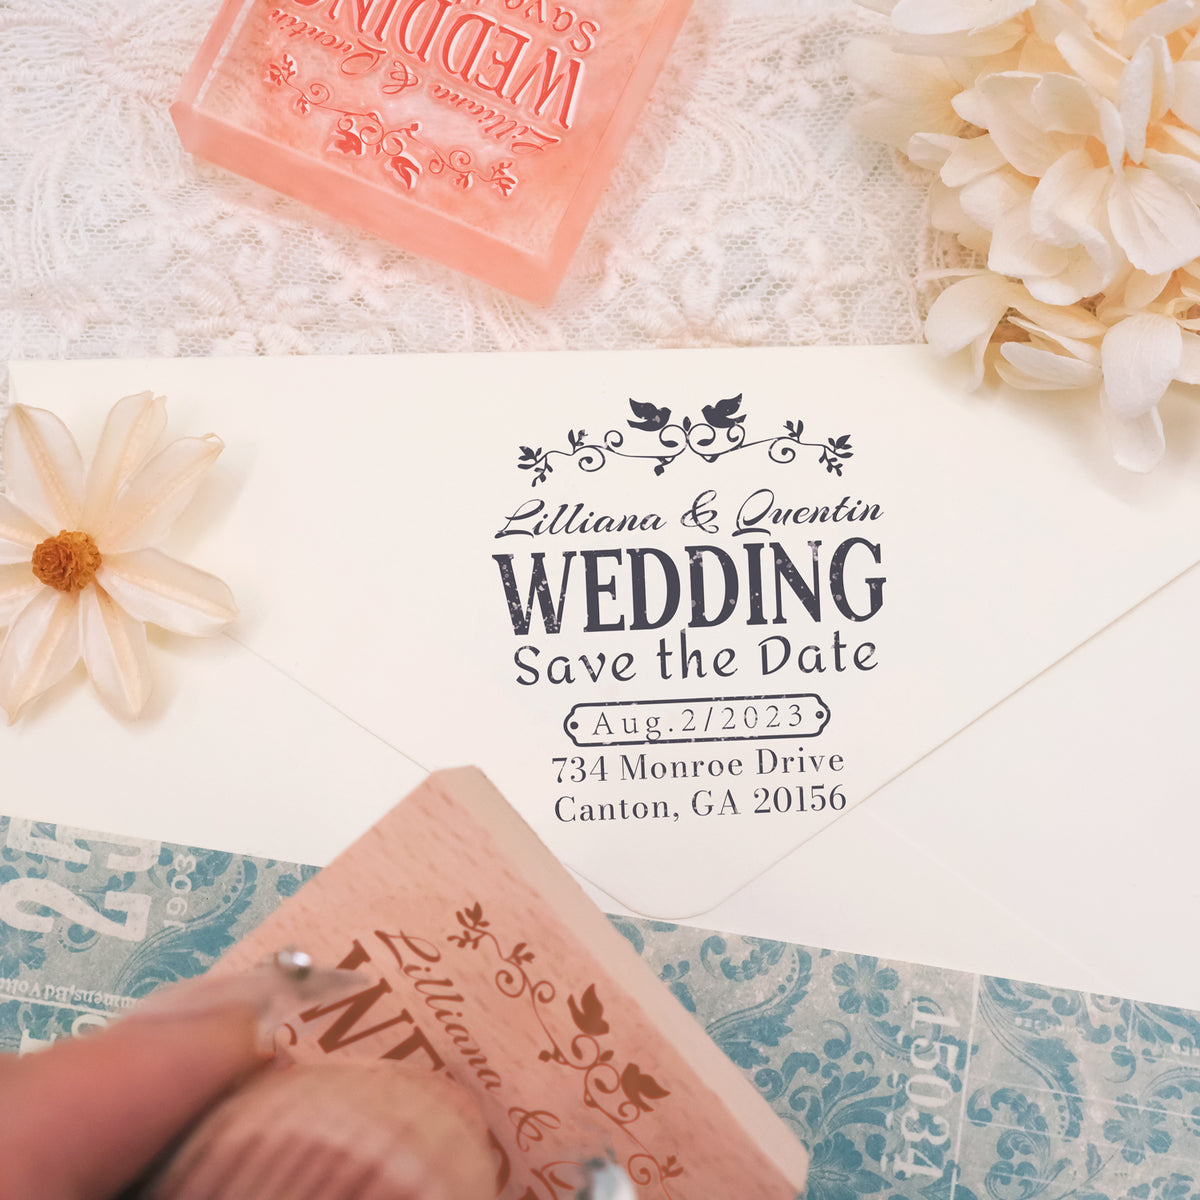 Custom Rubber Stamp - Custom Wedding Save The Date Rubber Stamp (25 Designs)